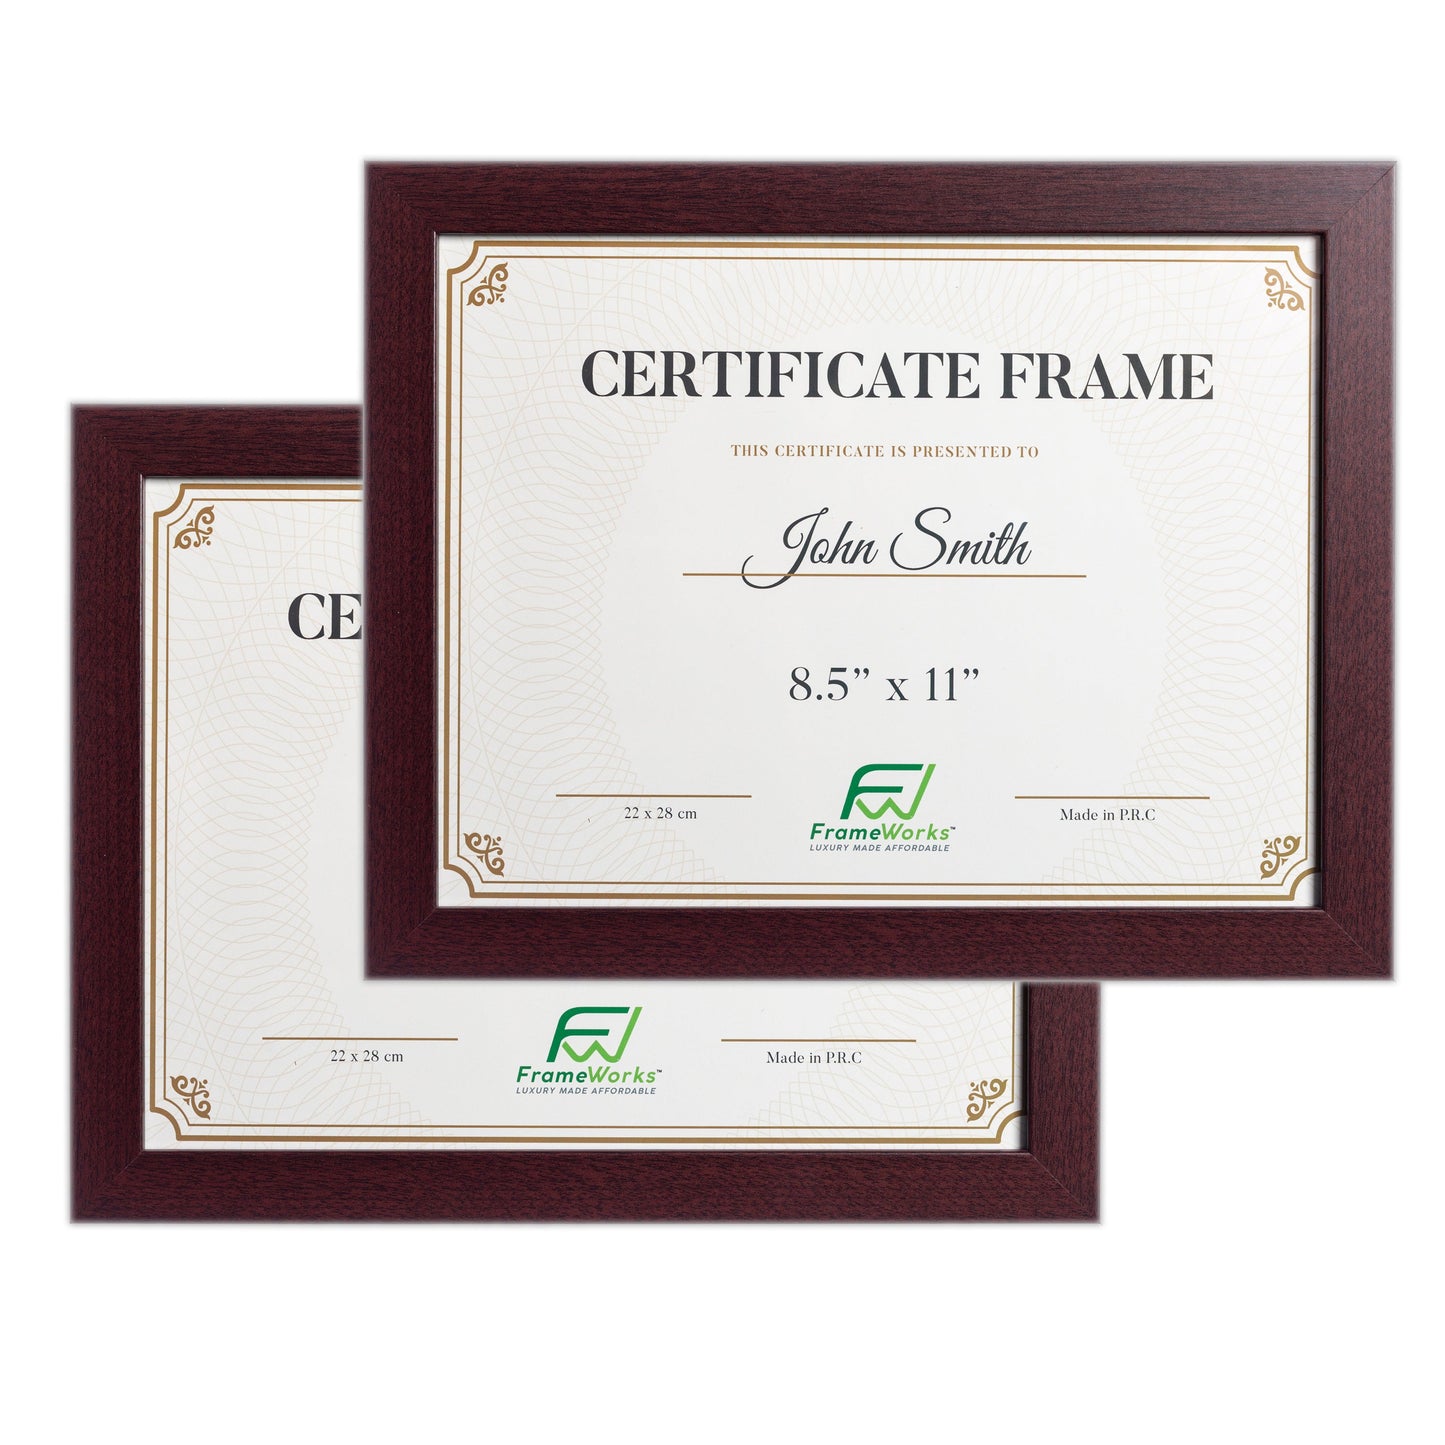 8.5" x 11" Classic Mahogany Wood Document Picture Frame with Tempered Glass